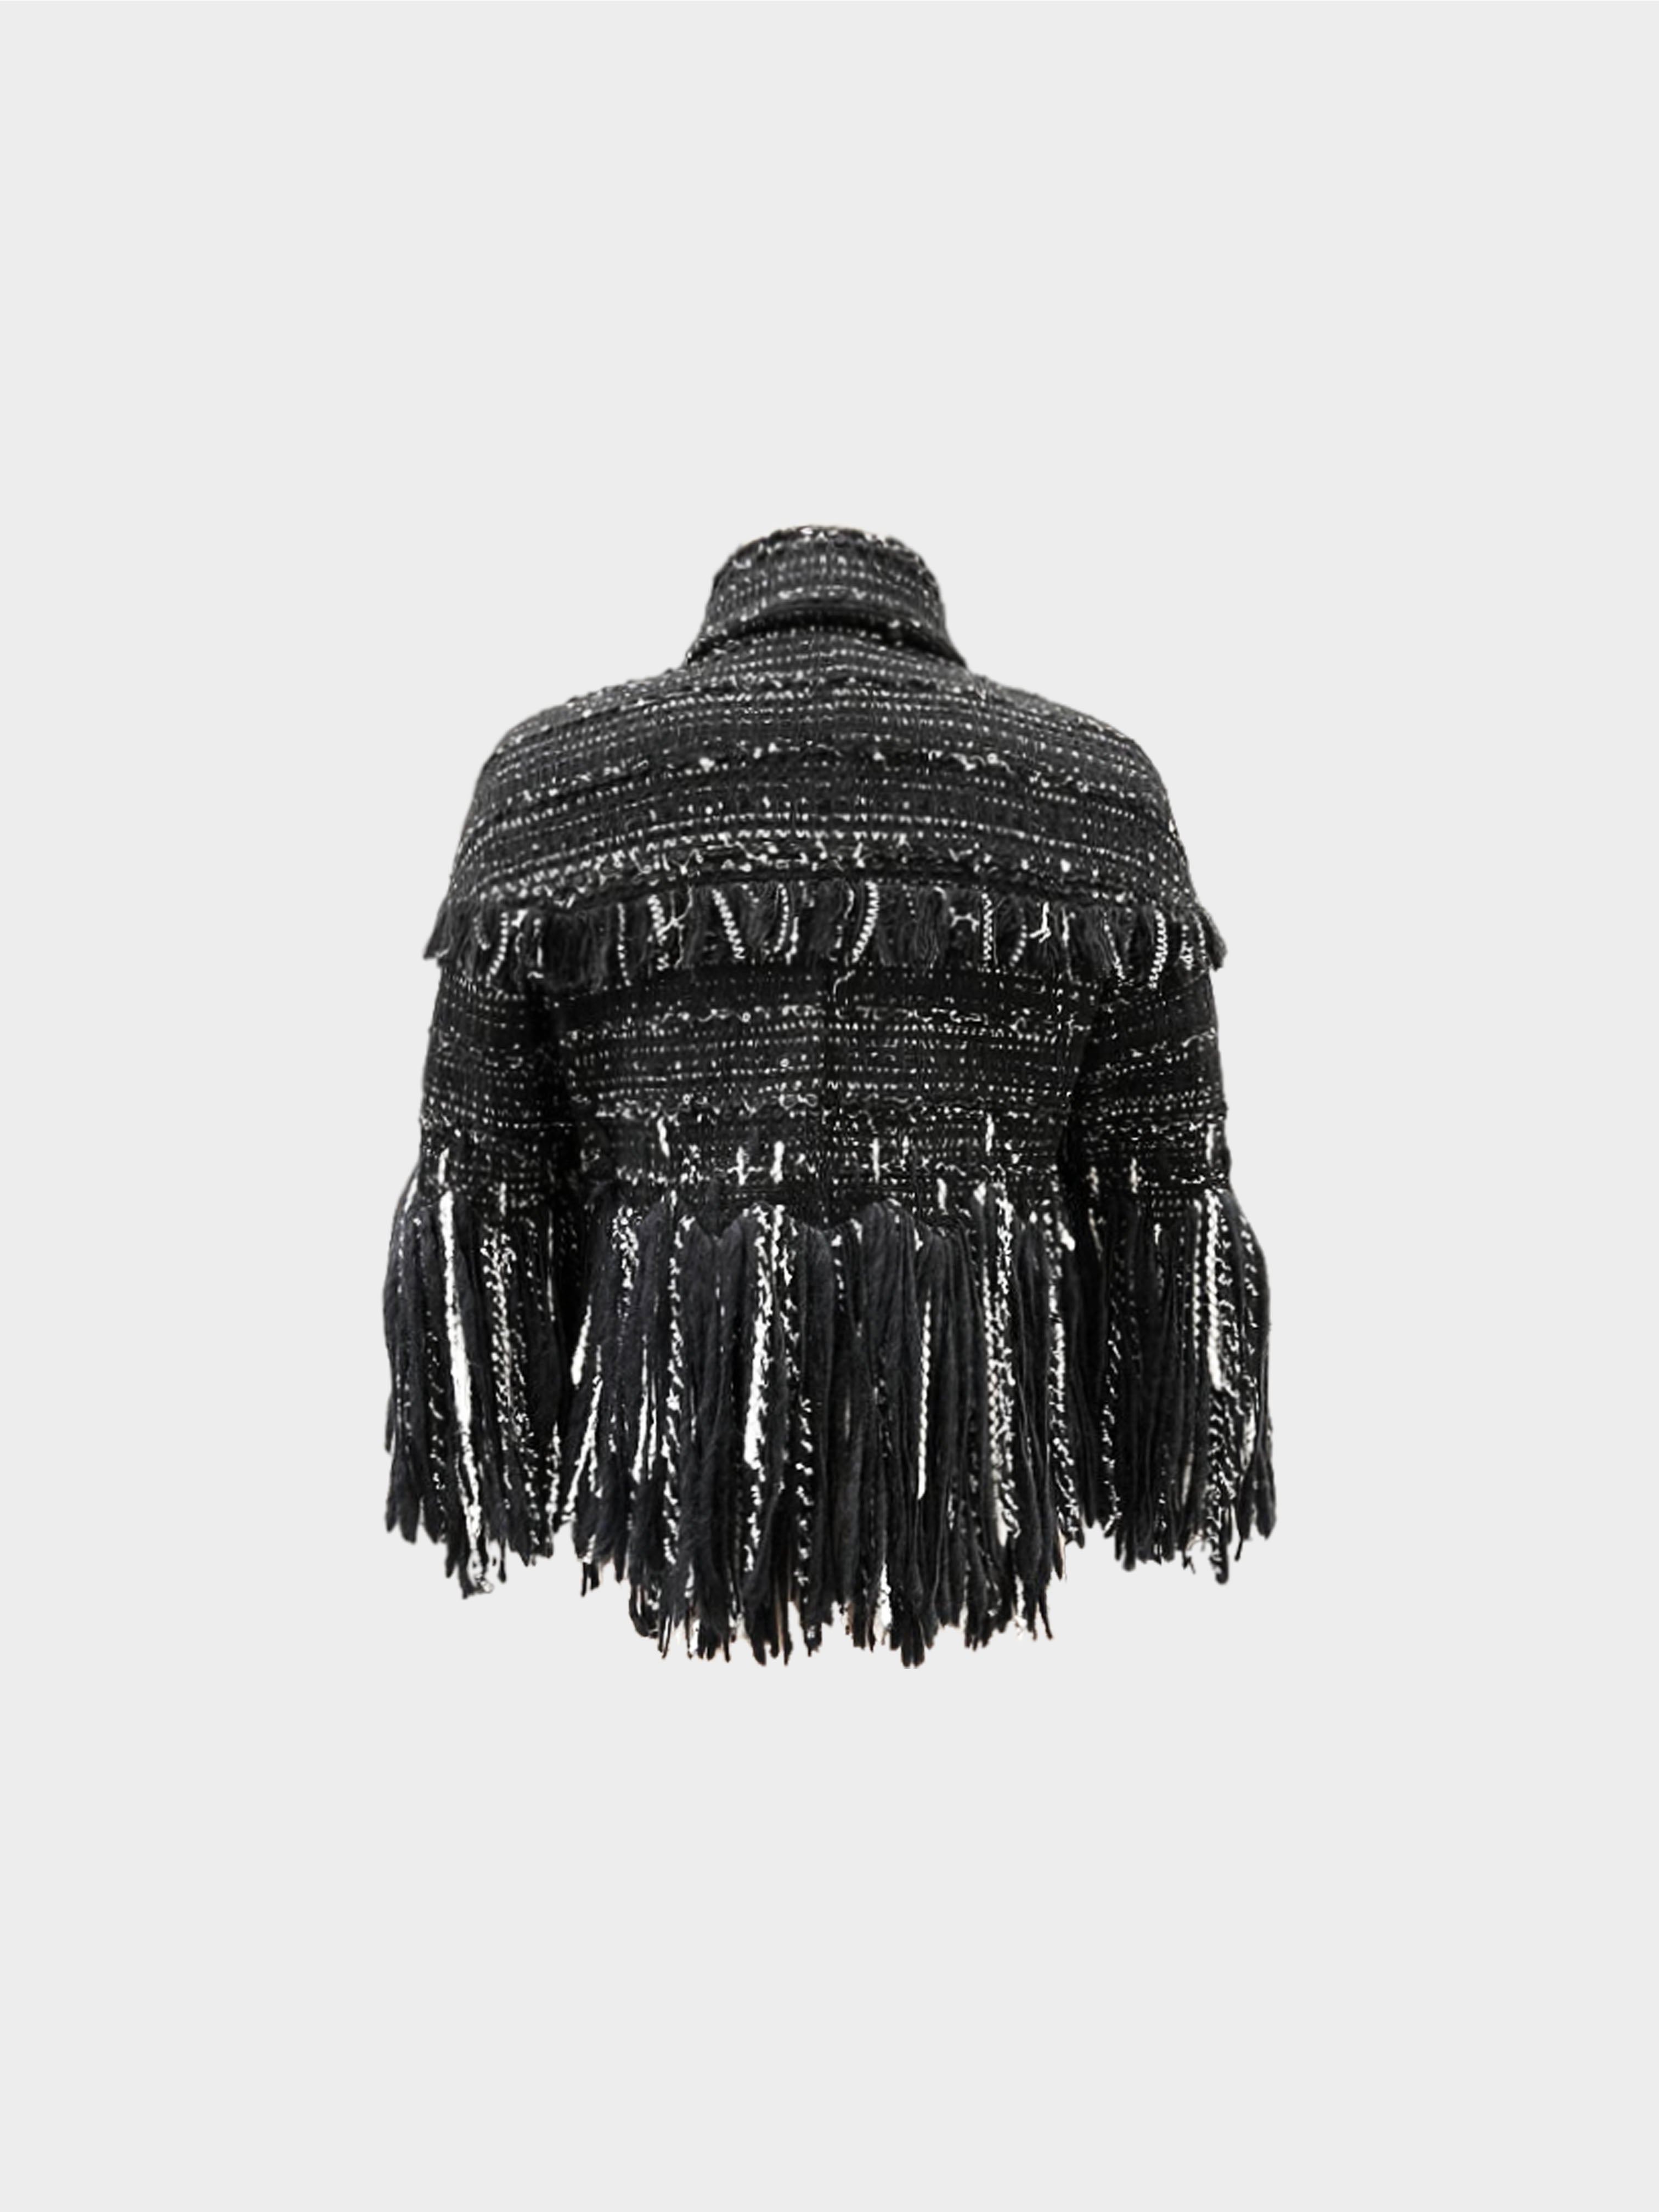 Chanel Fall 2010 Black and White Arctic Ice Jewel Button Fringe Jacket